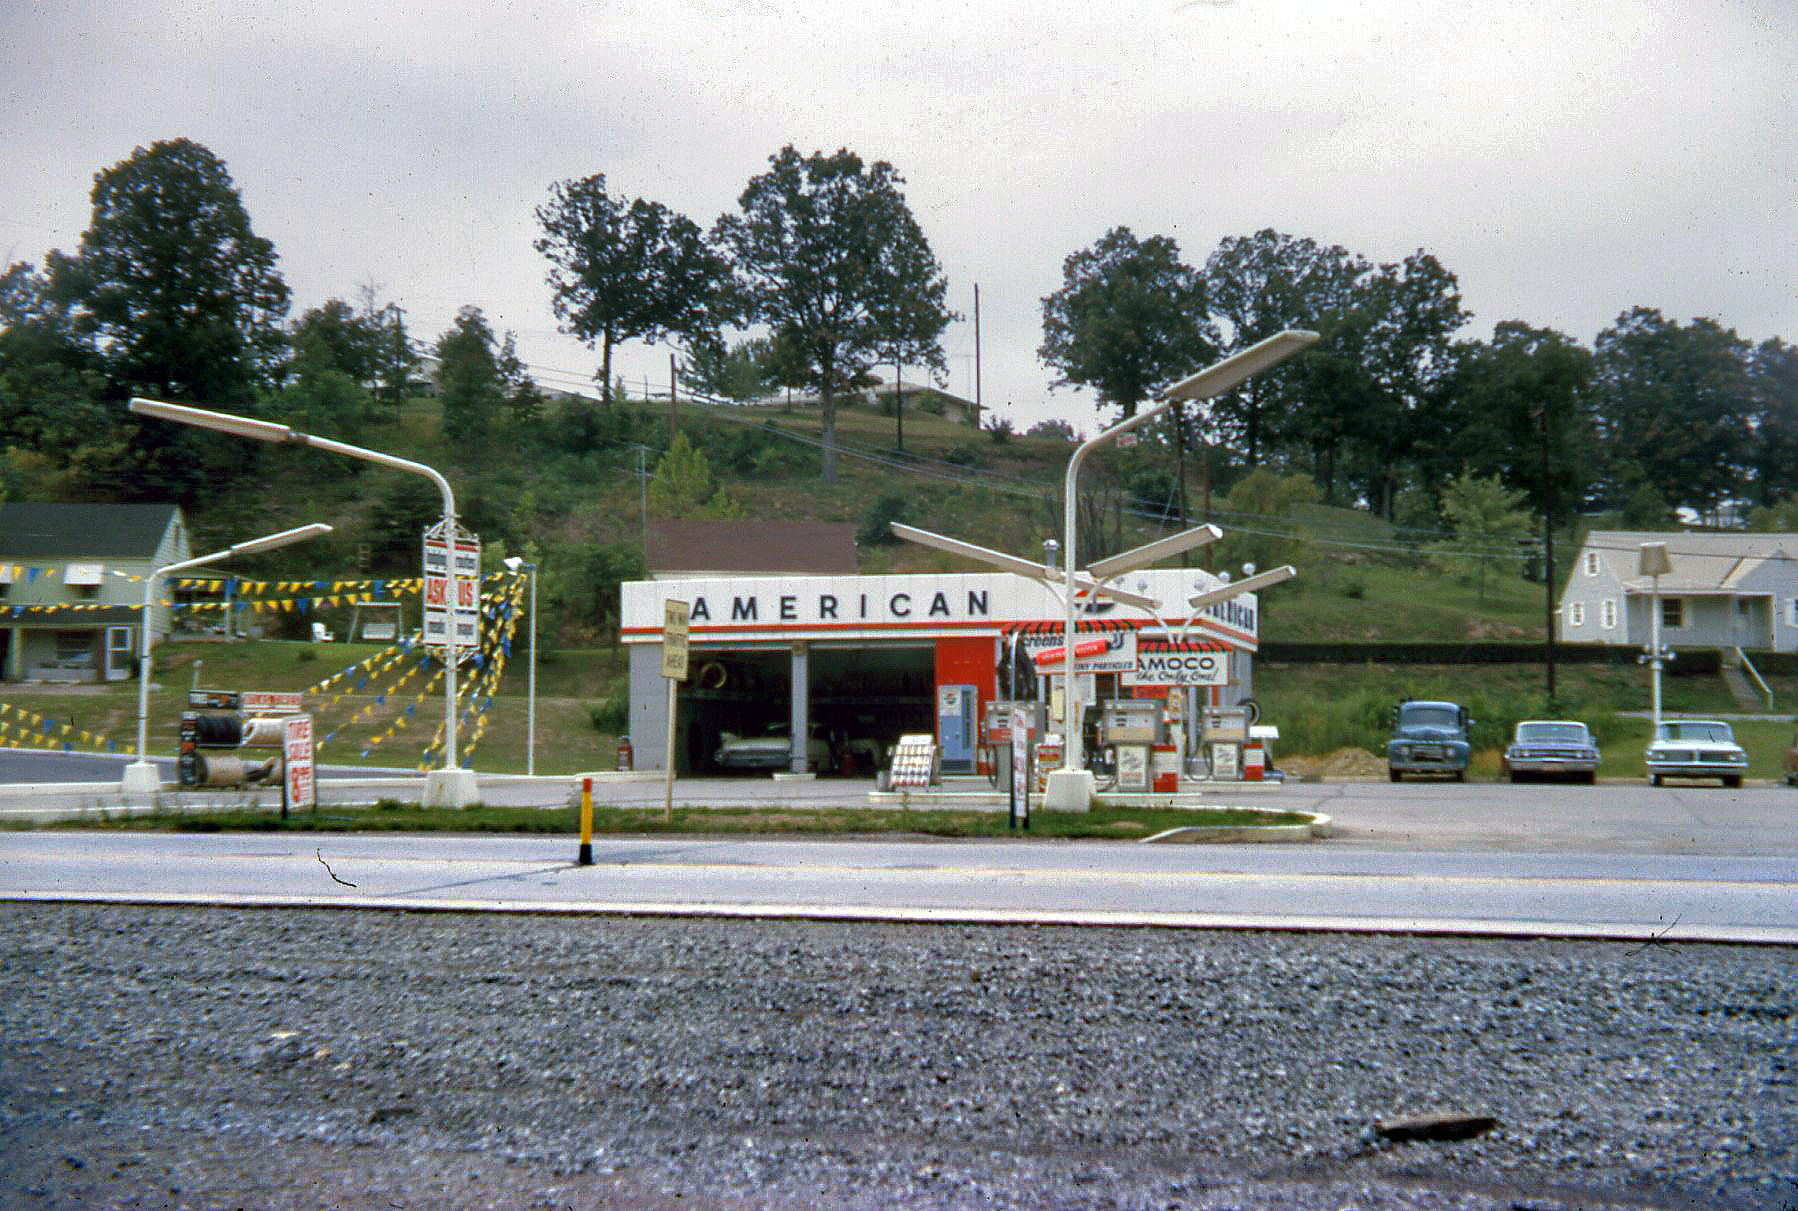 American service station. Don't know where, but it's 1965. View full size.